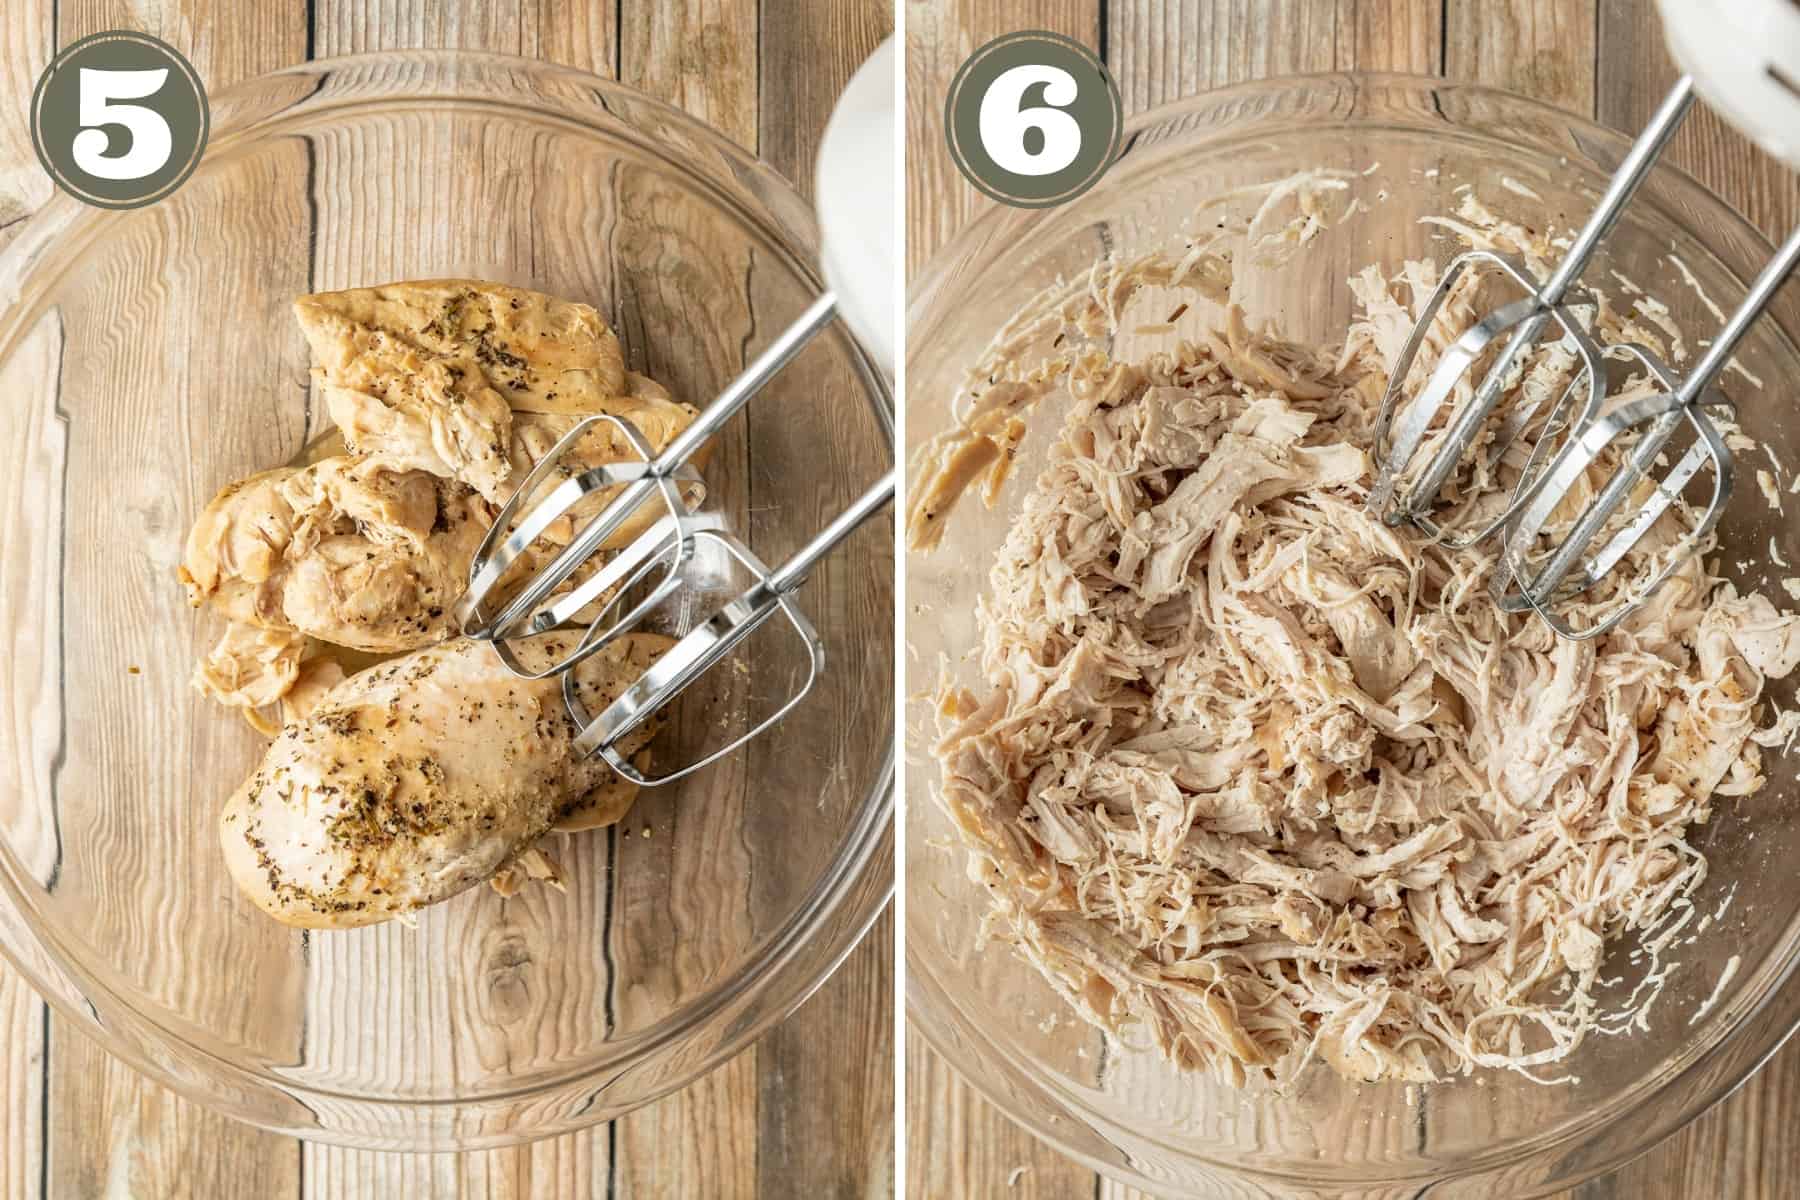 Side by side photos of the process to make instant pot chicken including whole chicken breasts in a bowl as well as a bowl of shredded chicken breast near a hand mixer.